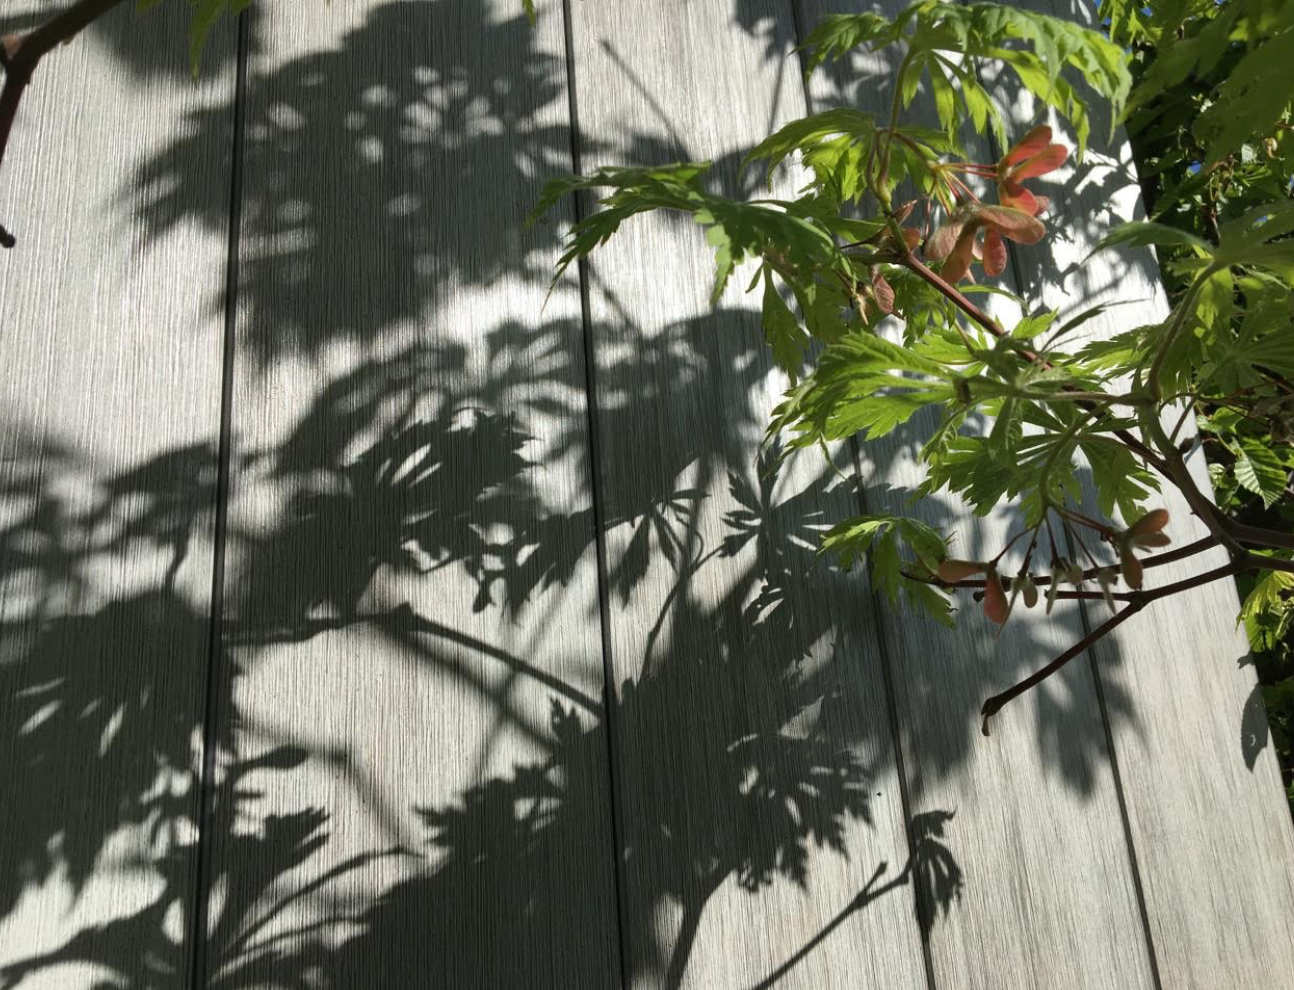 A plant from the garden casts shadows on wooden decking